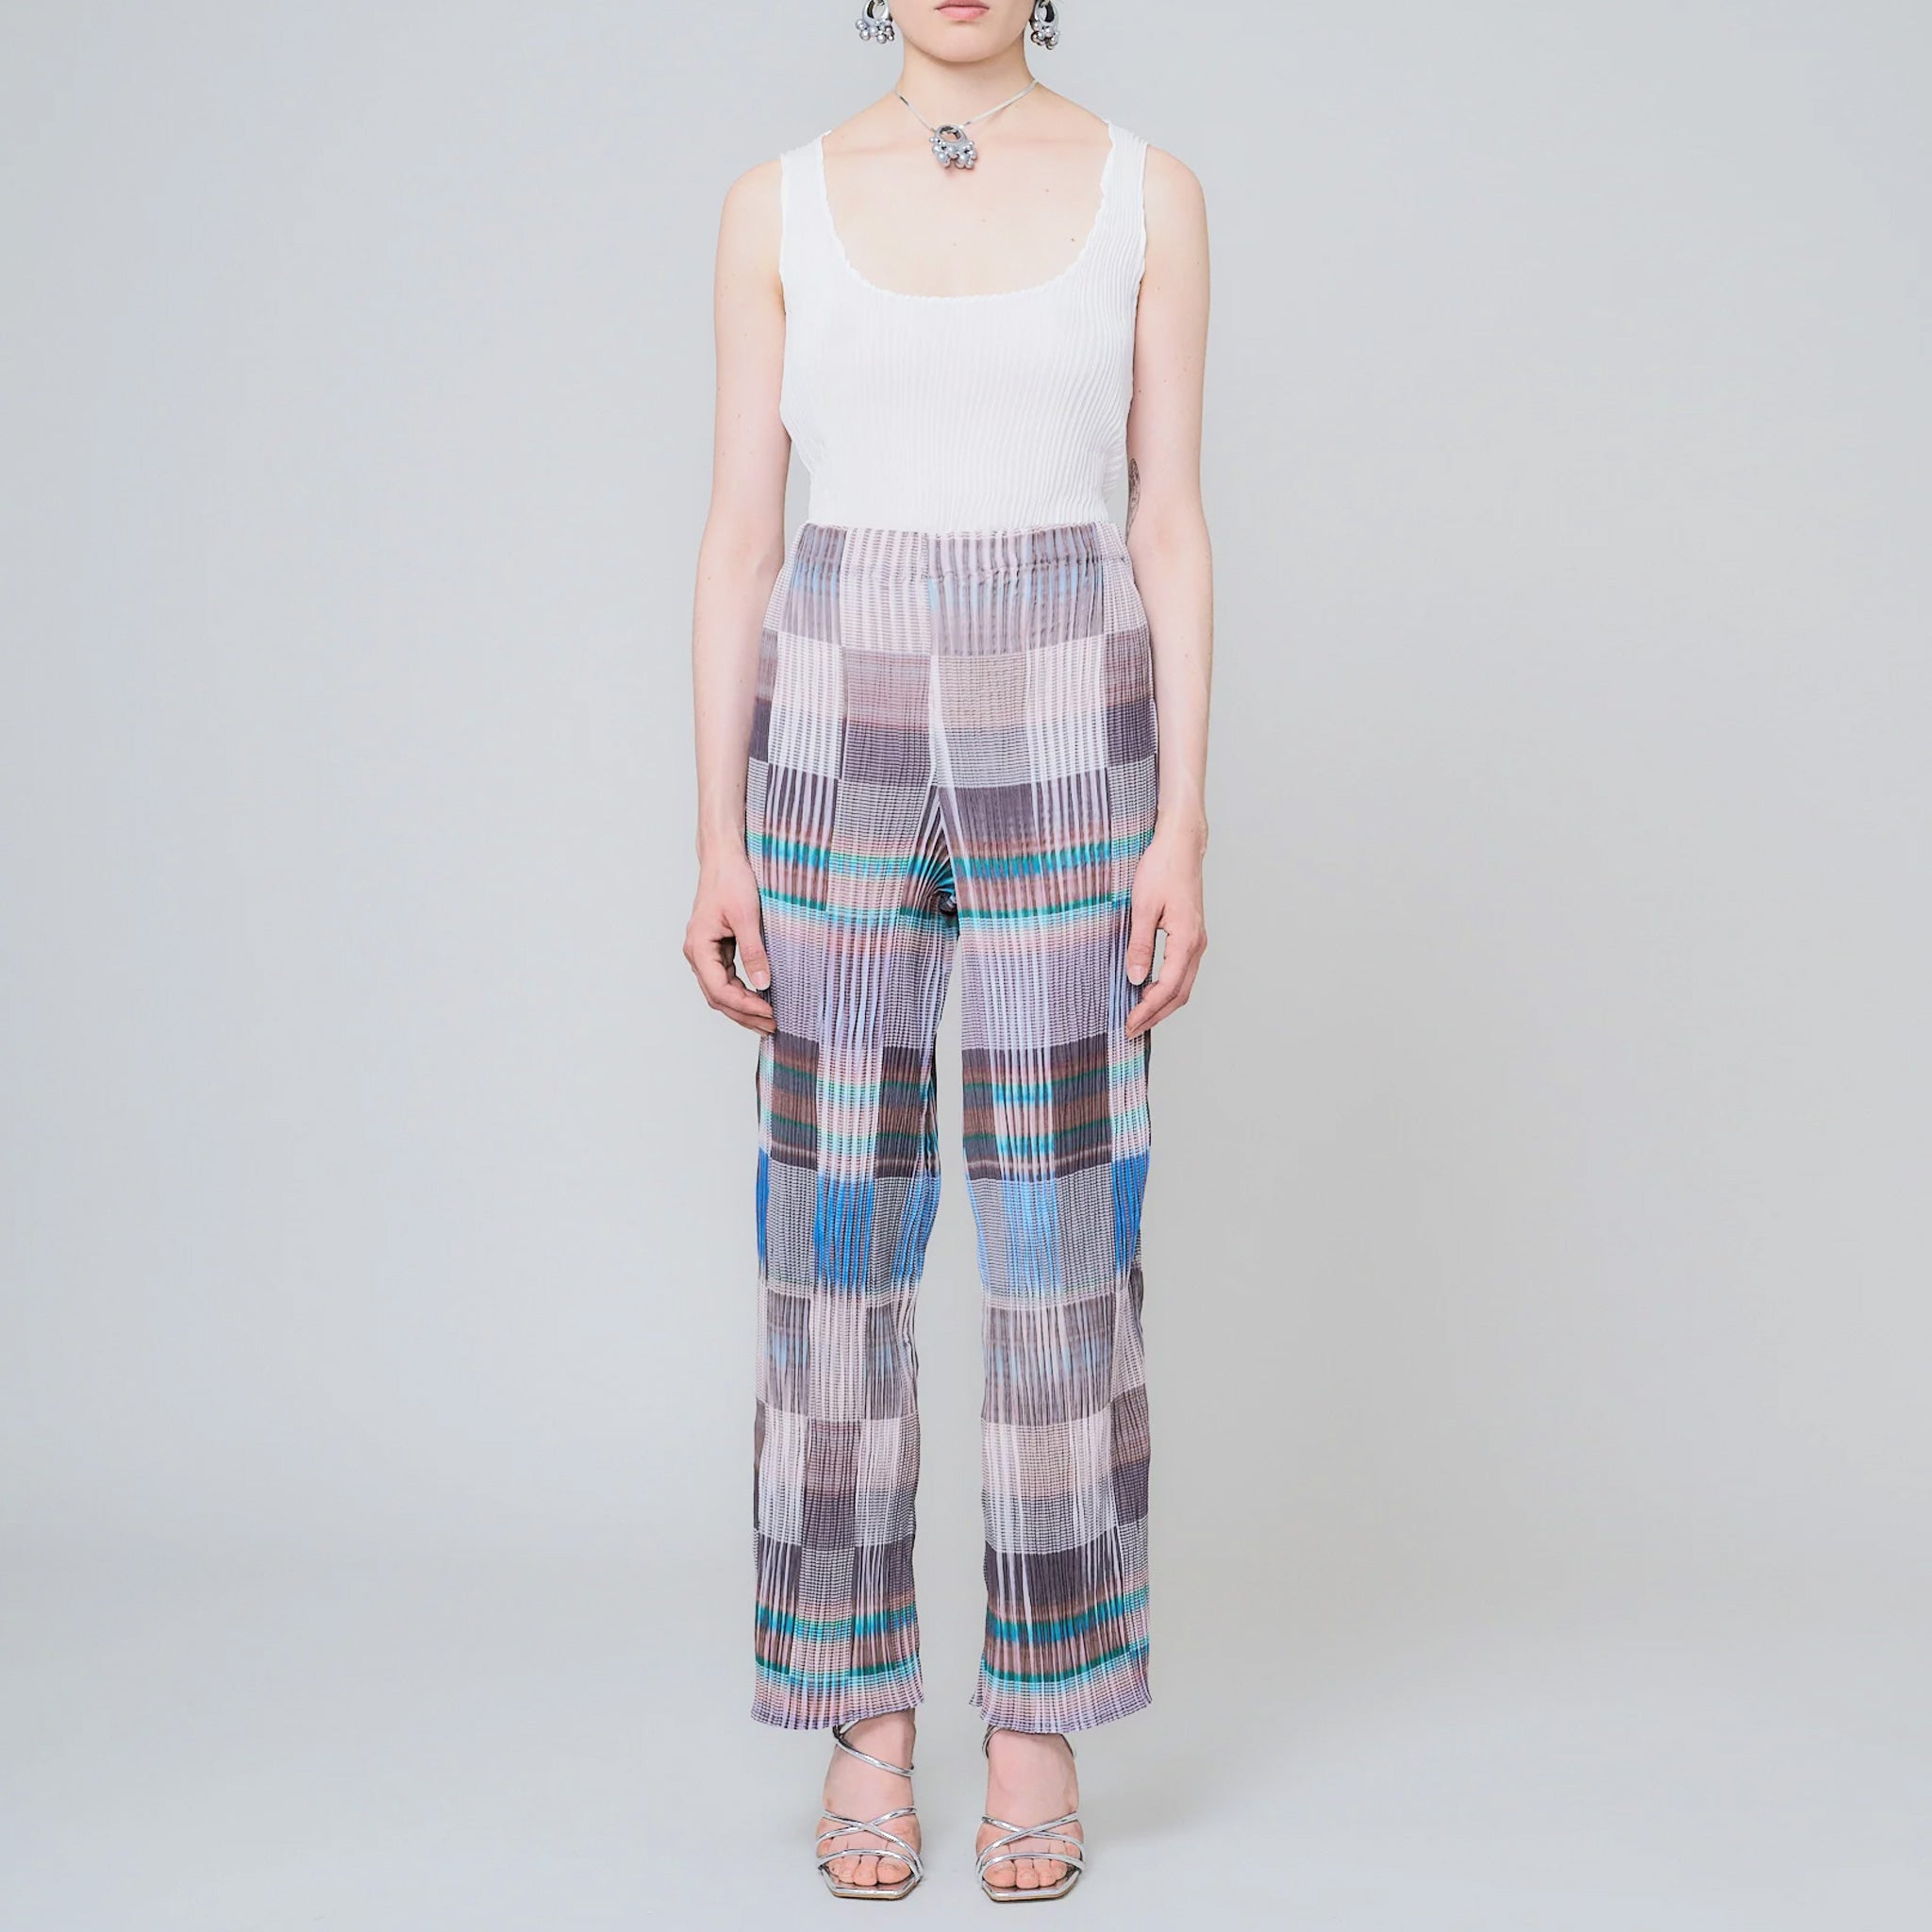 Pleated high waist trousers with a gridded graphic pattern in greys, whites, and blues - front view.